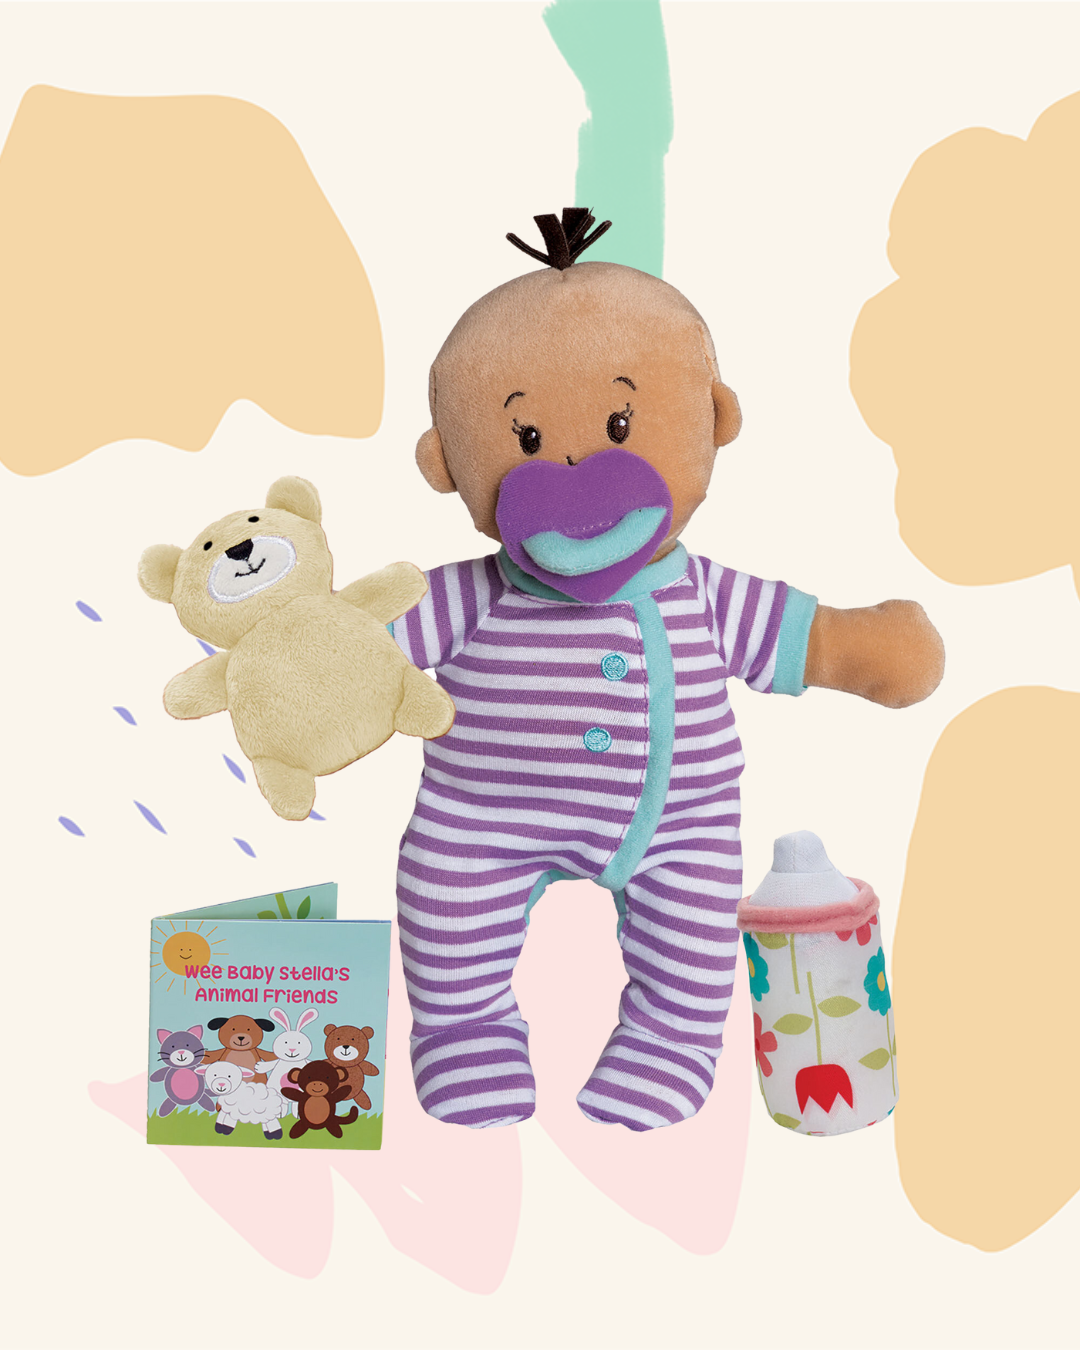 Wee Baby Stella doll beige in striped purple sleeper with bottle and teddy bear from Manhattan Toy.